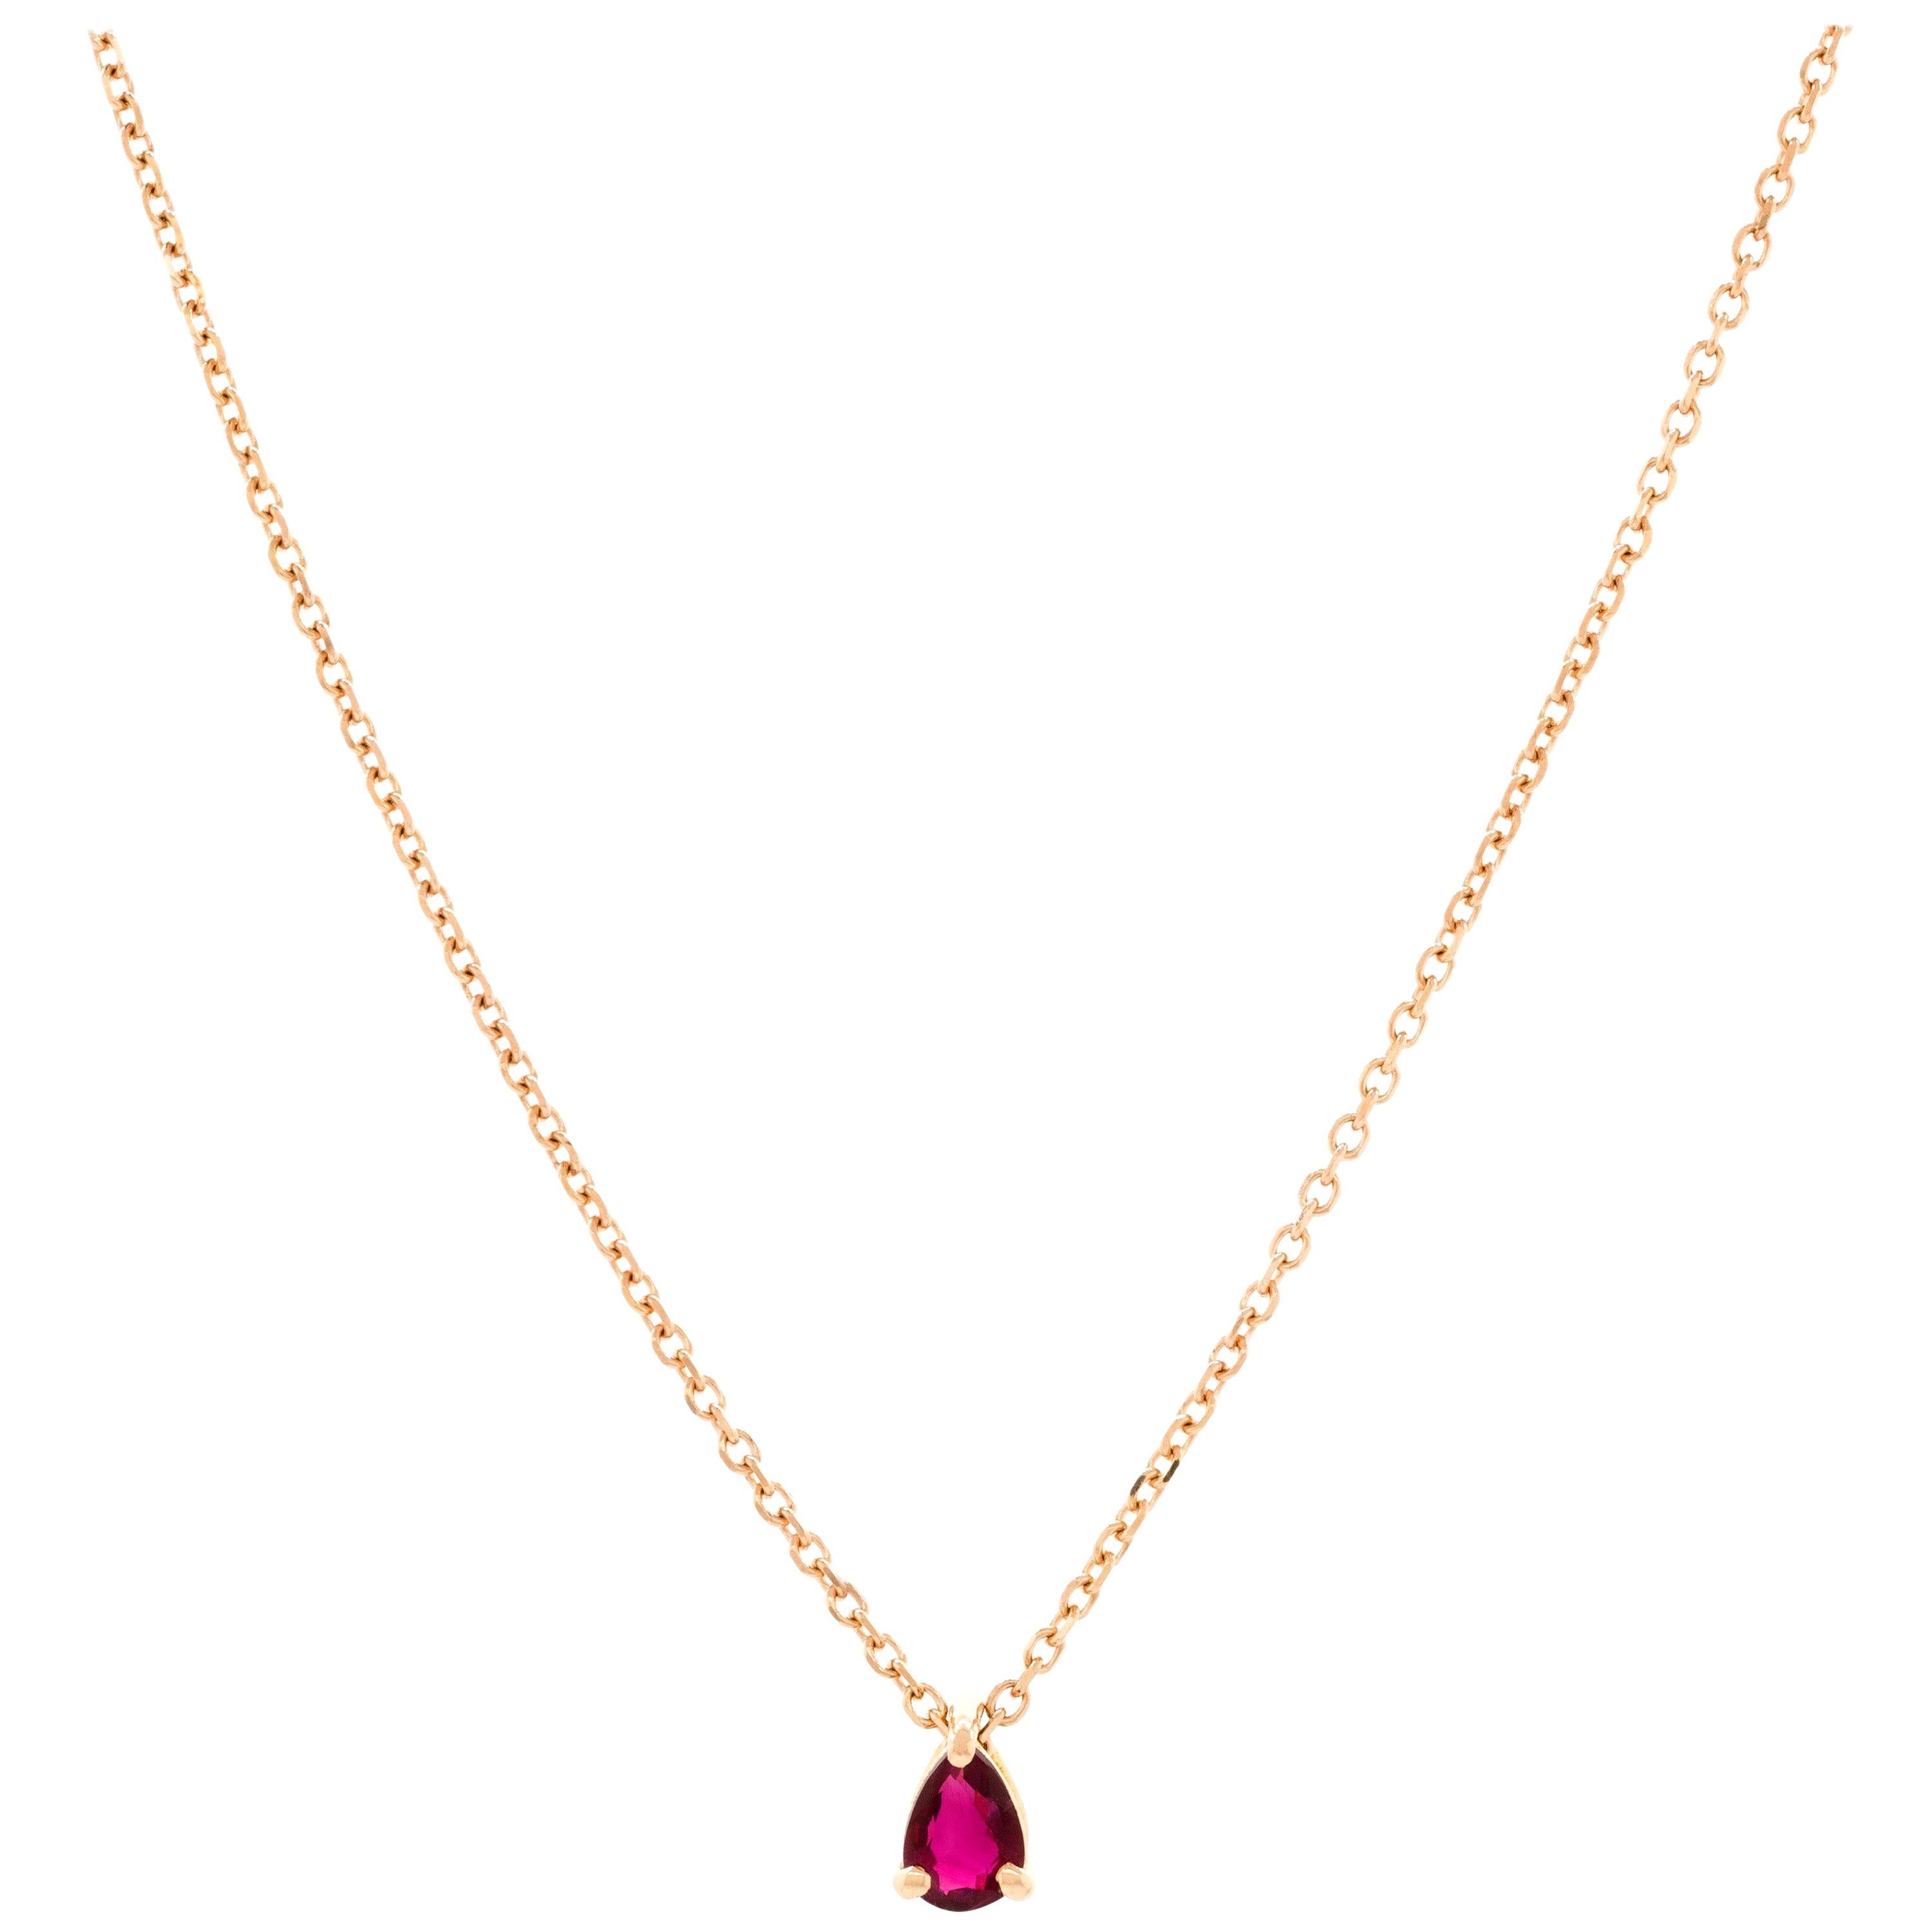 Alessa Solo Pear Chain Necklace 18 Karat Rose Gold Essentials Collection